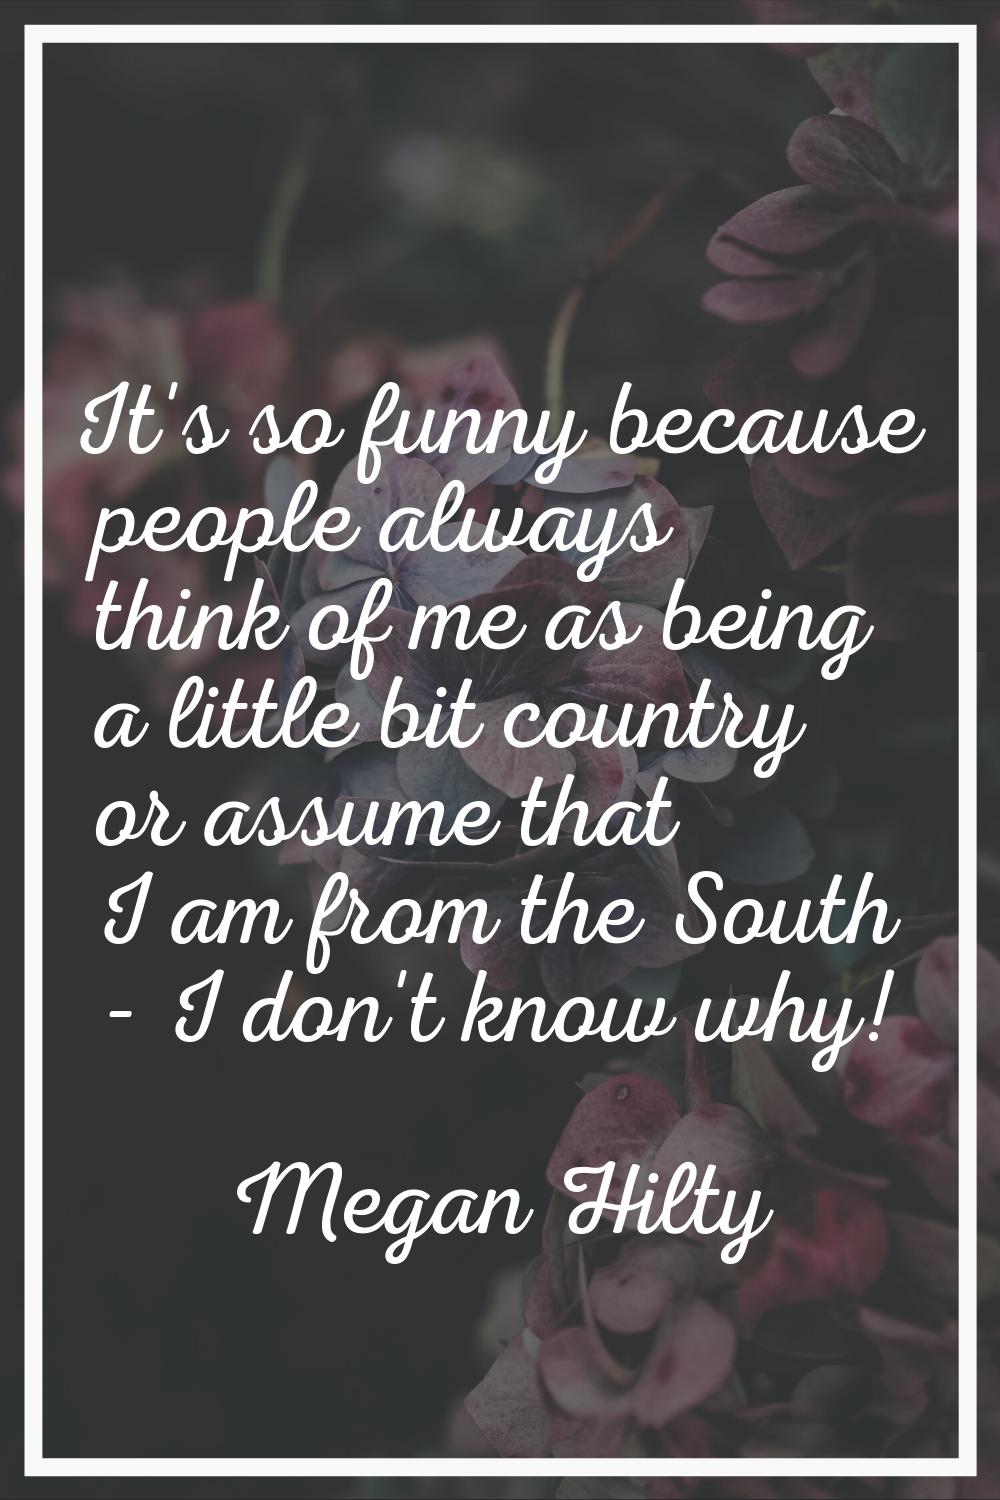 It's so funny because people always think of me as being a little bit country or assume that I am f